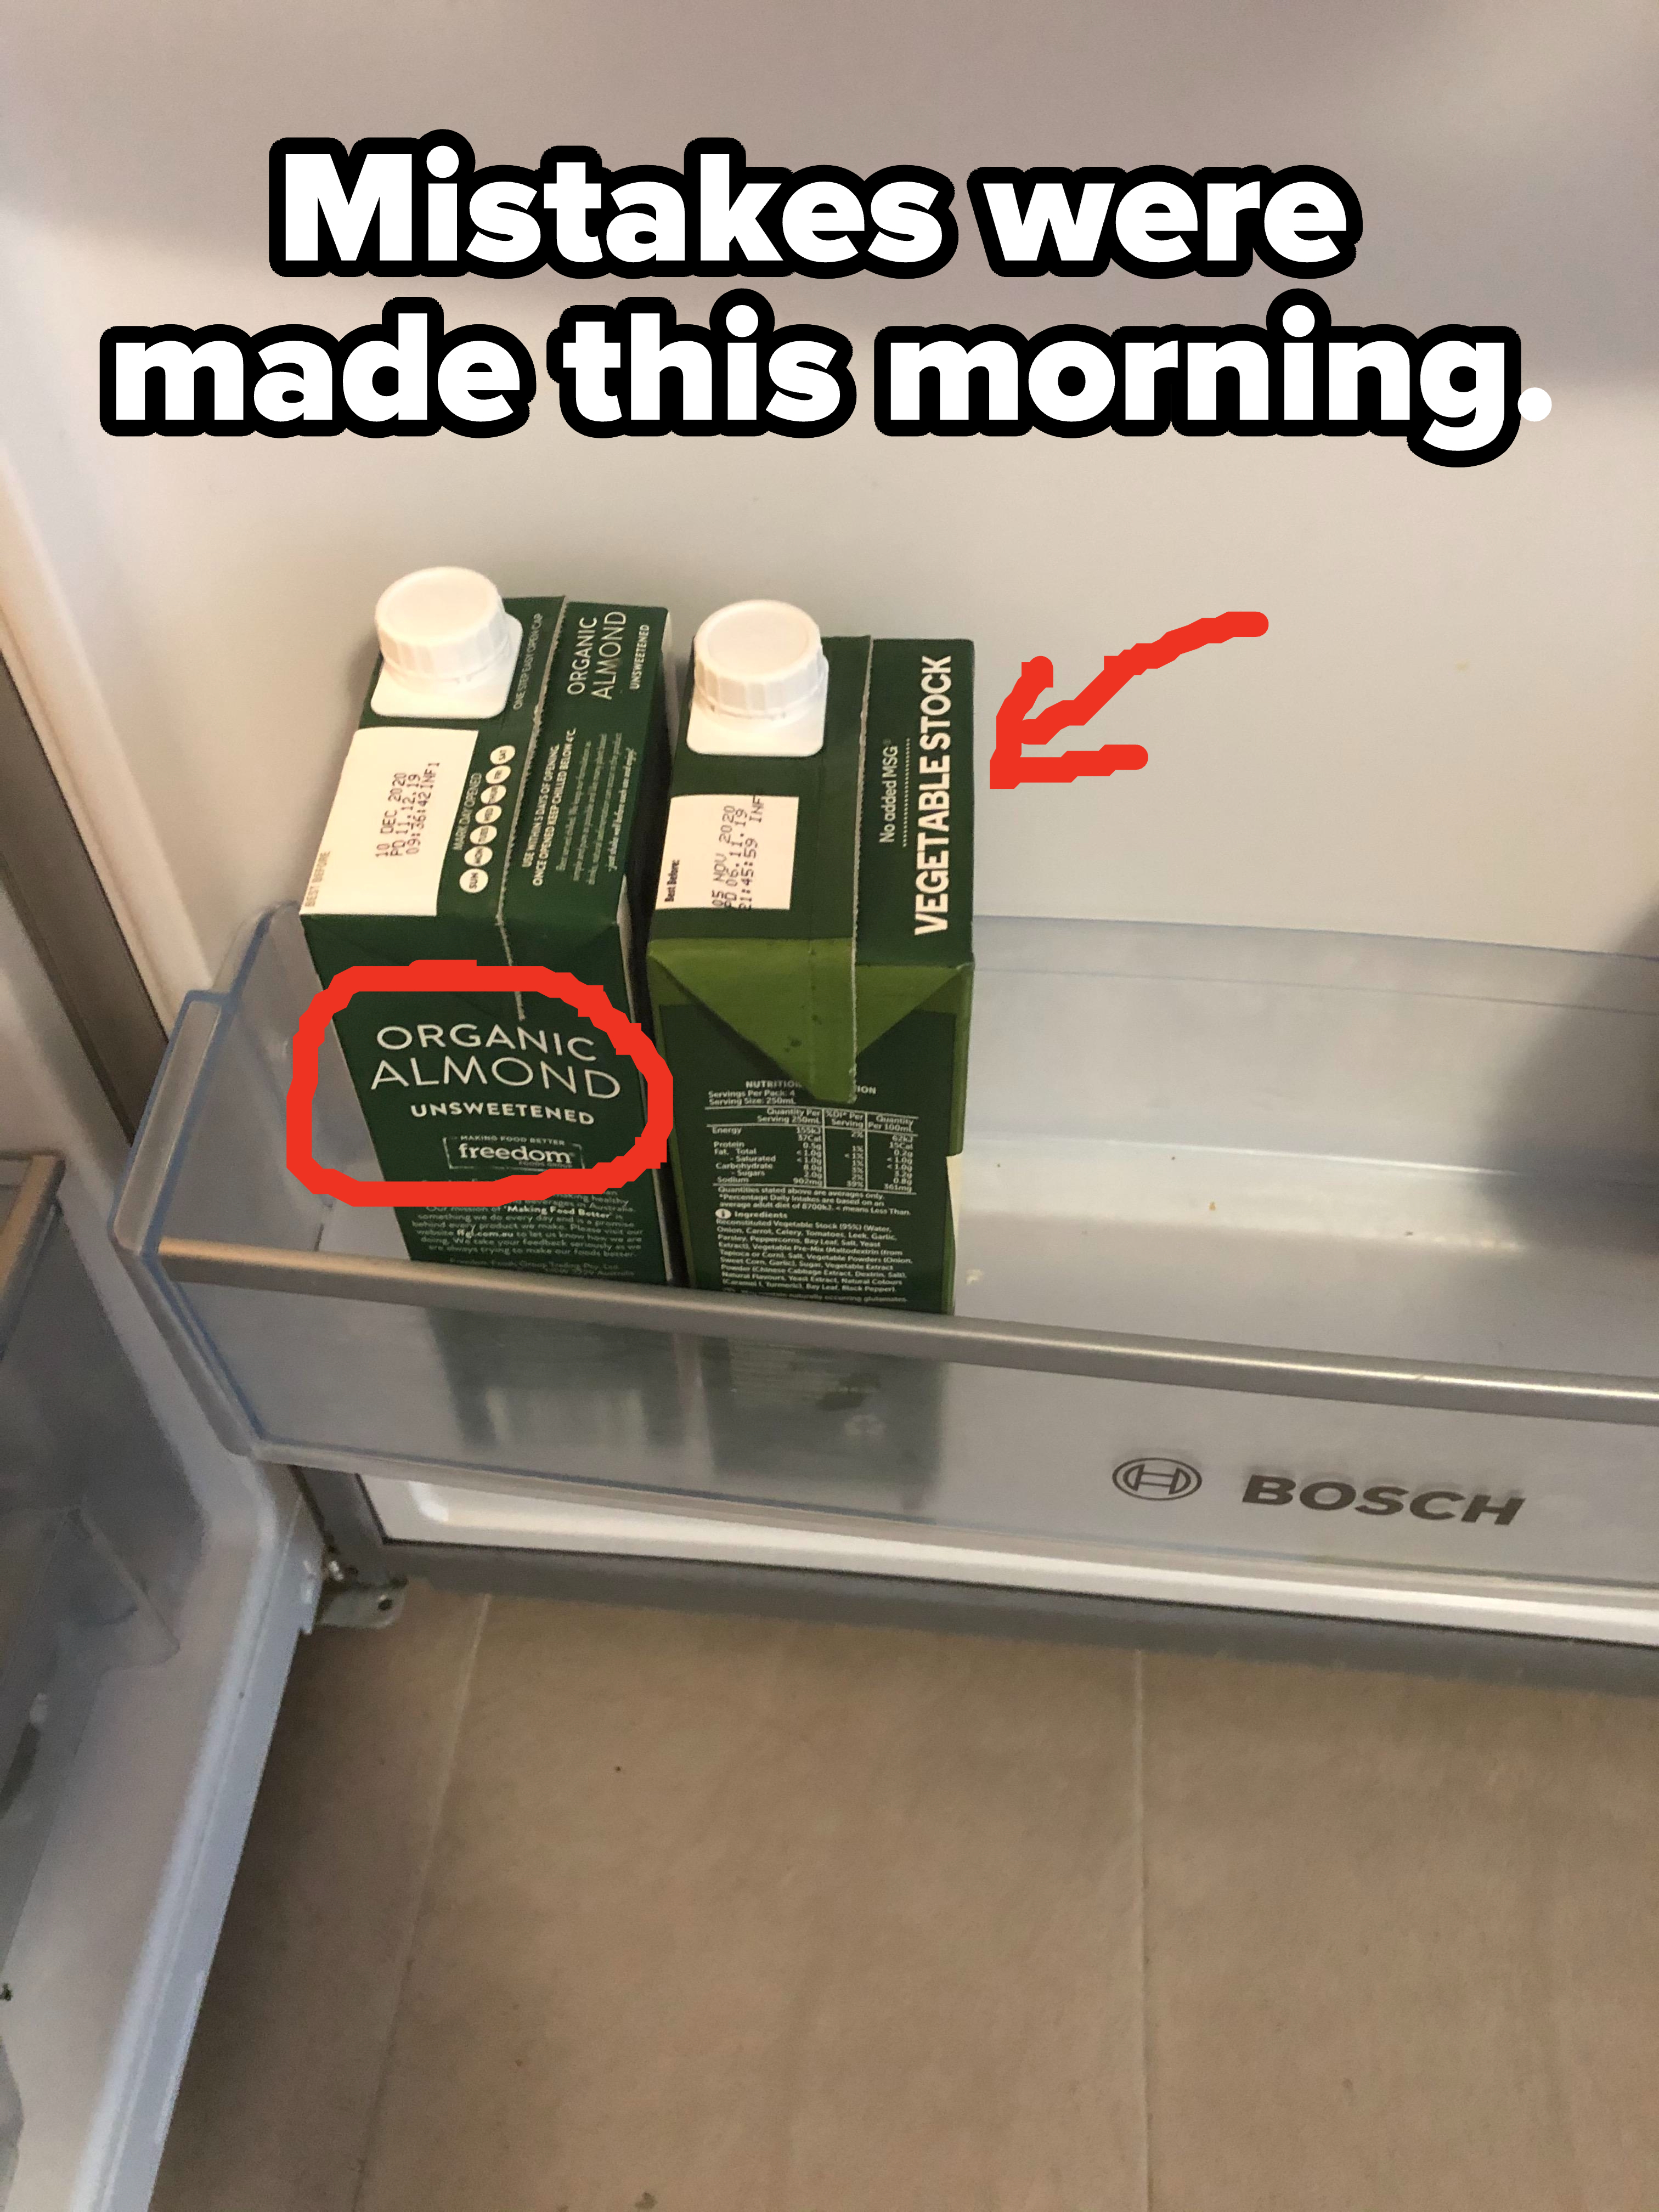 &quot;Mistakes were made this morning&quot; caption with view of two identical-looking containers in the fridge, one of organic almond milk and another of vegetable stock